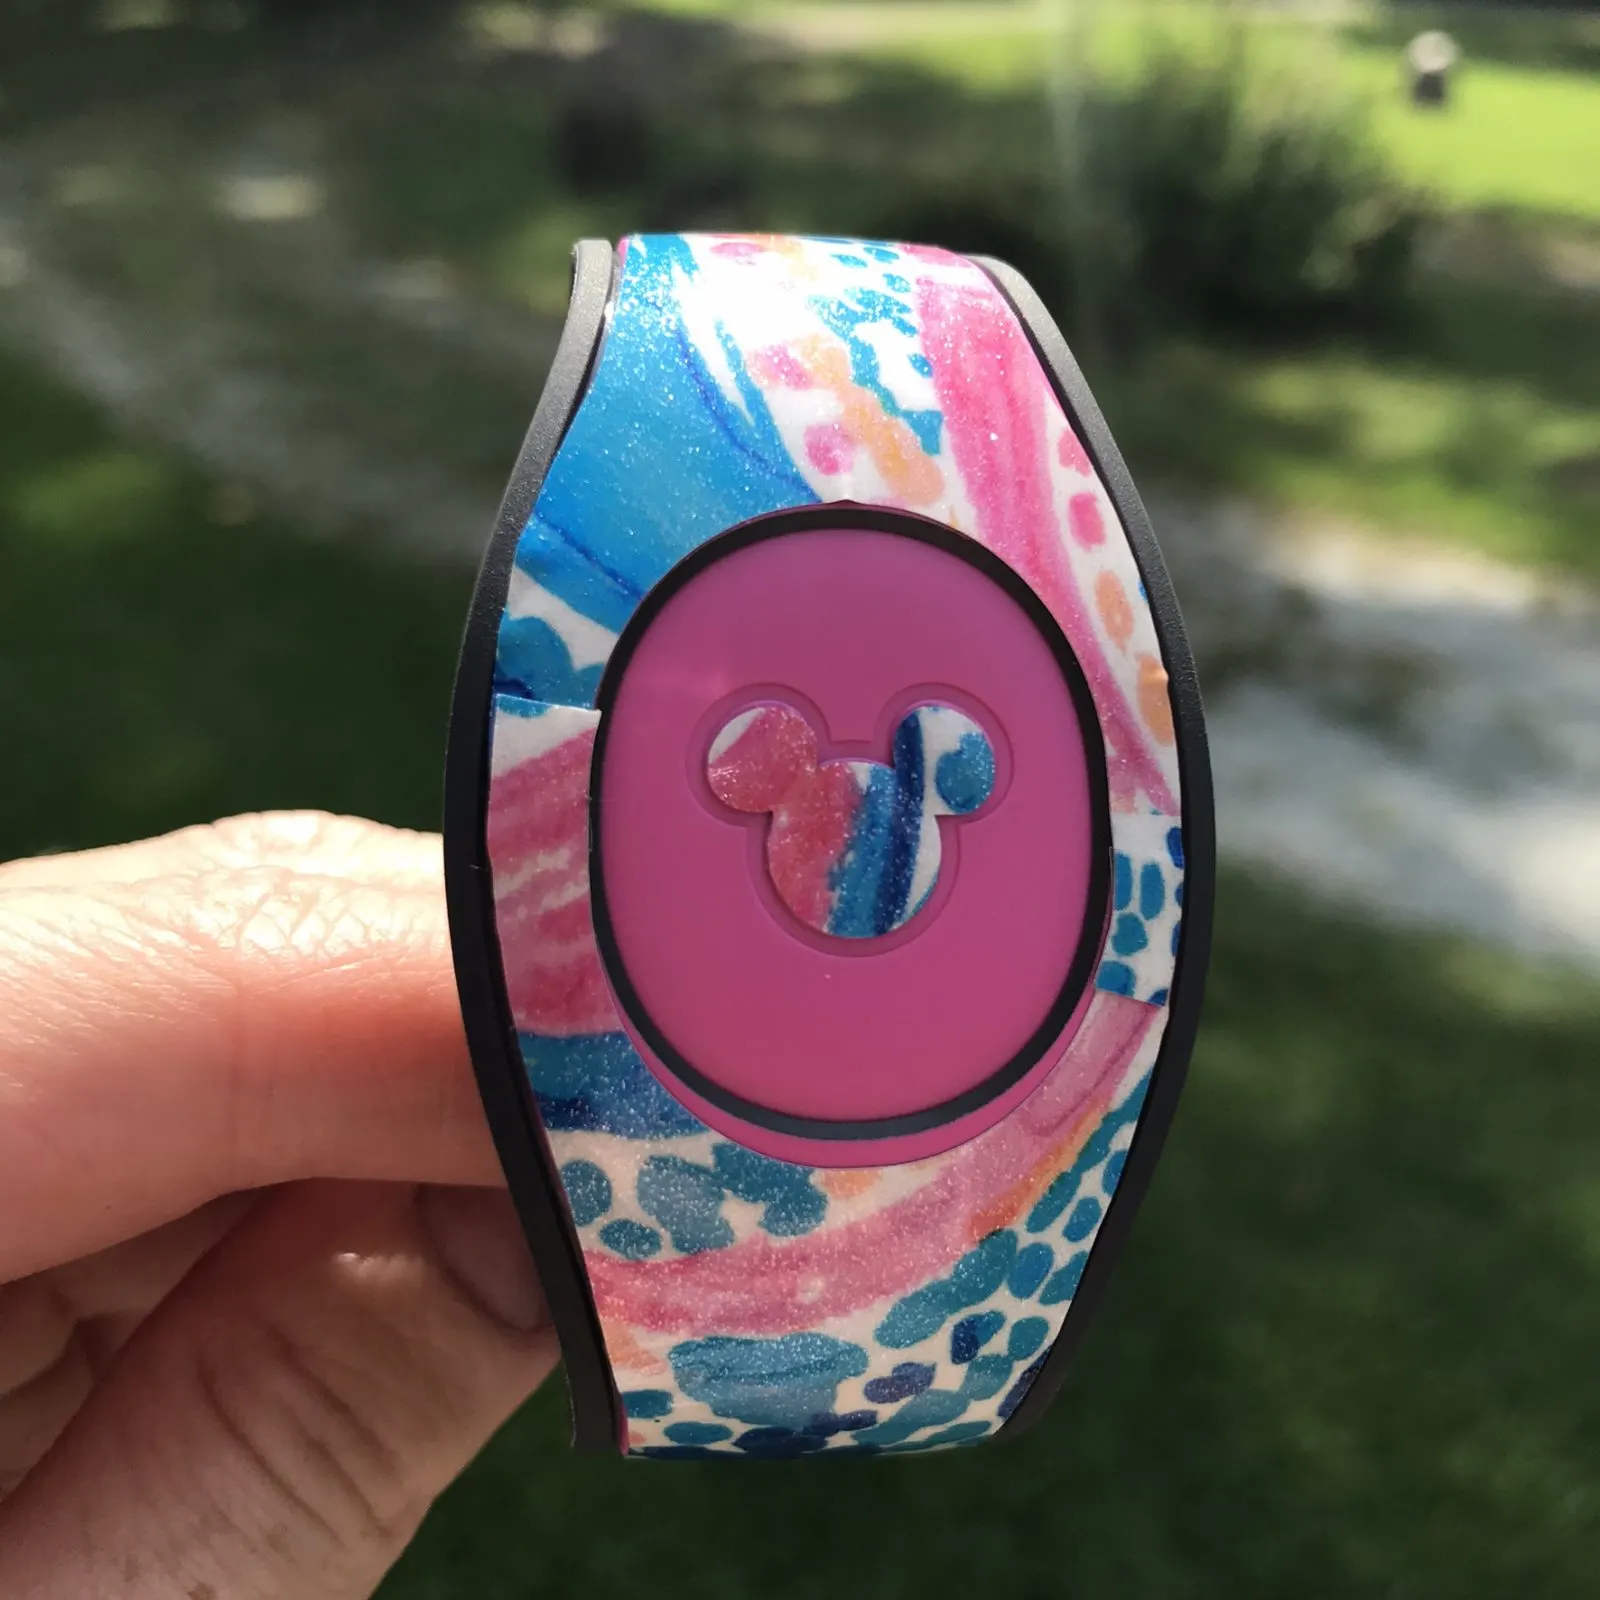 Get MagicBand Decals For Only $3 Each! - The Budget Mouse